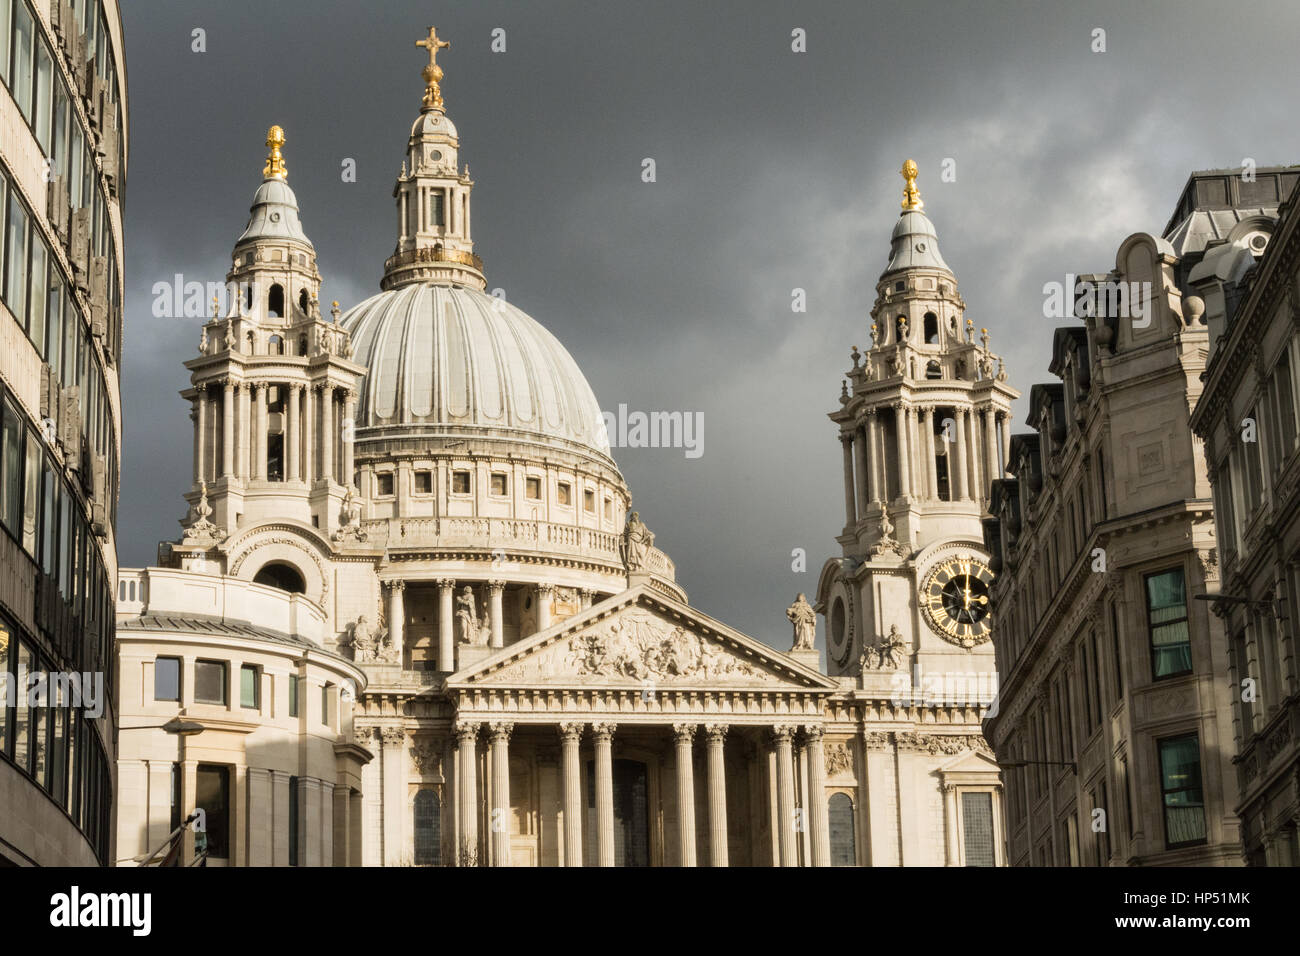 A closeup view of the Dome of St Paul's Cathedral set against a dark foreboding sky, City of London, England, UK Stock Photo